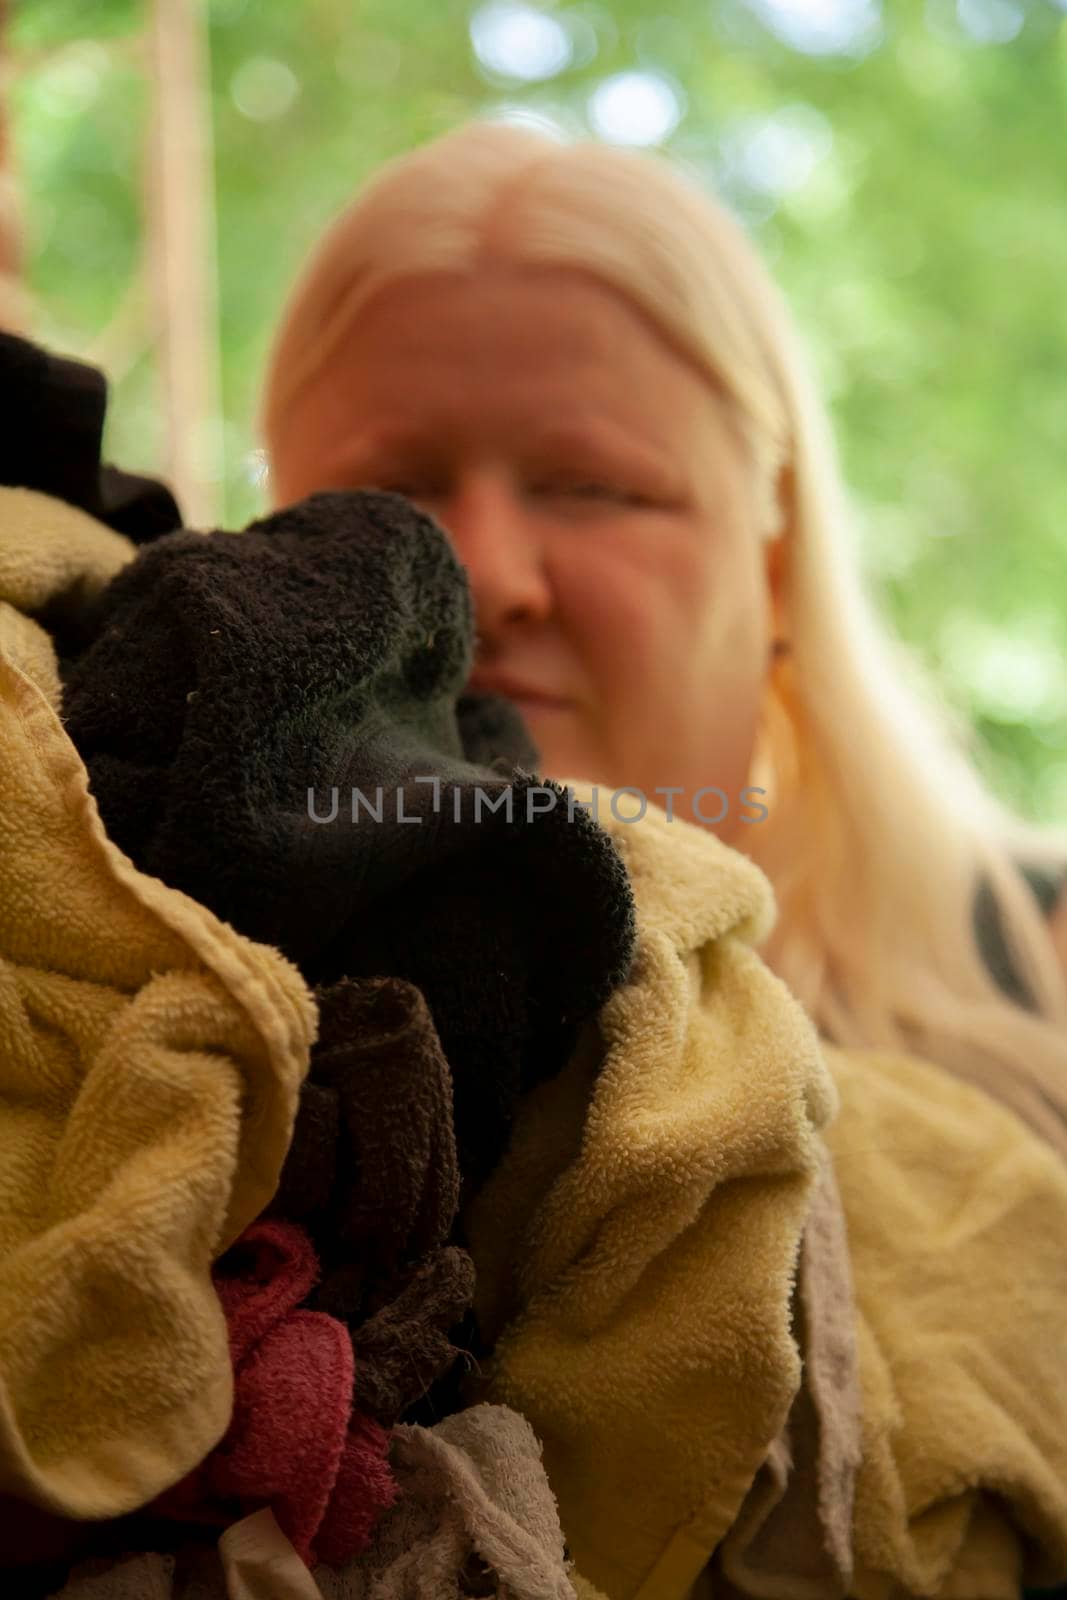 Woman carrying dirty yellow and black towels with other colorful wash cloths to do laundry